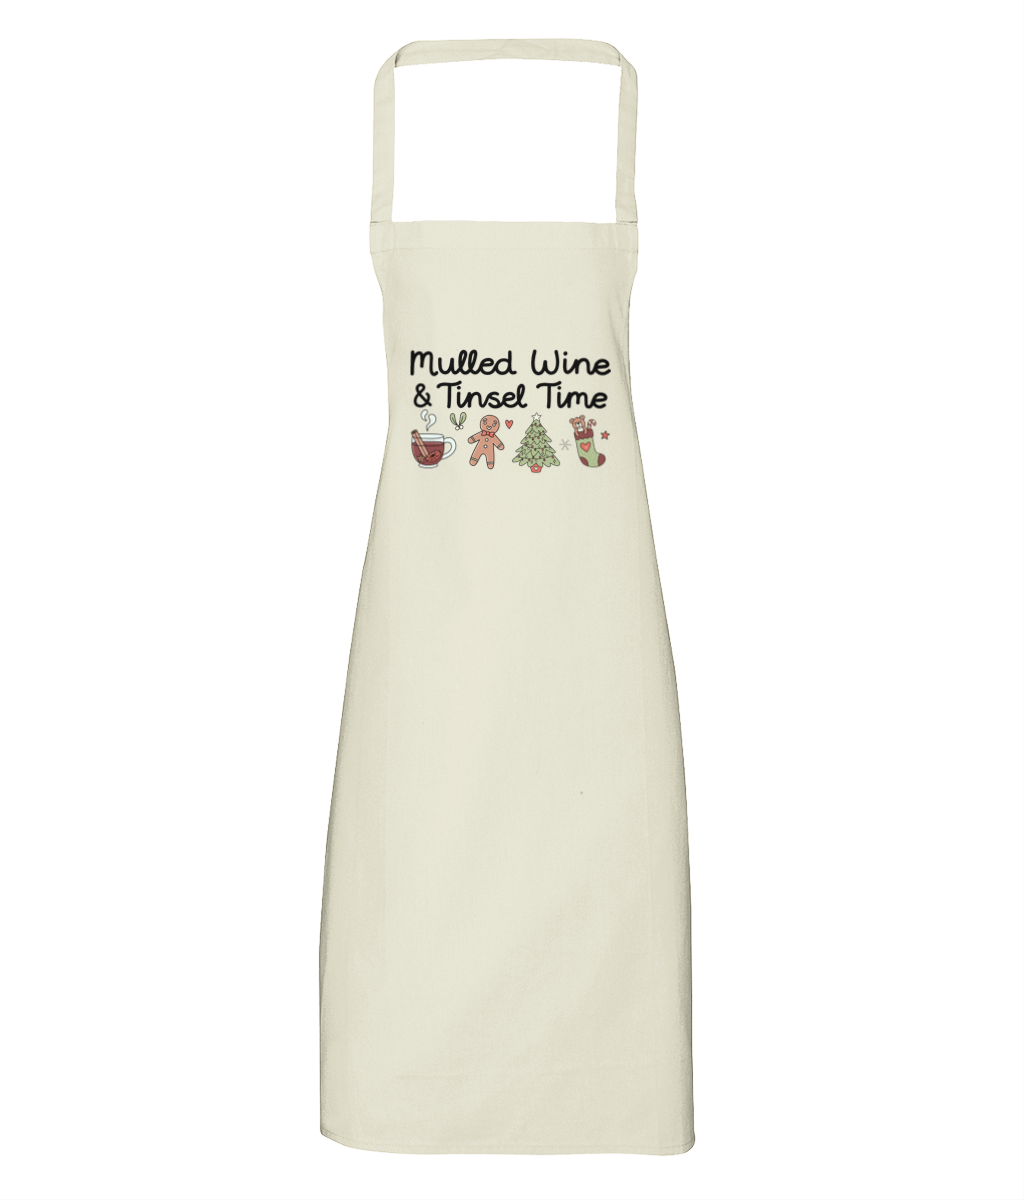 Mulled Wine & Tinsel Time - Apron